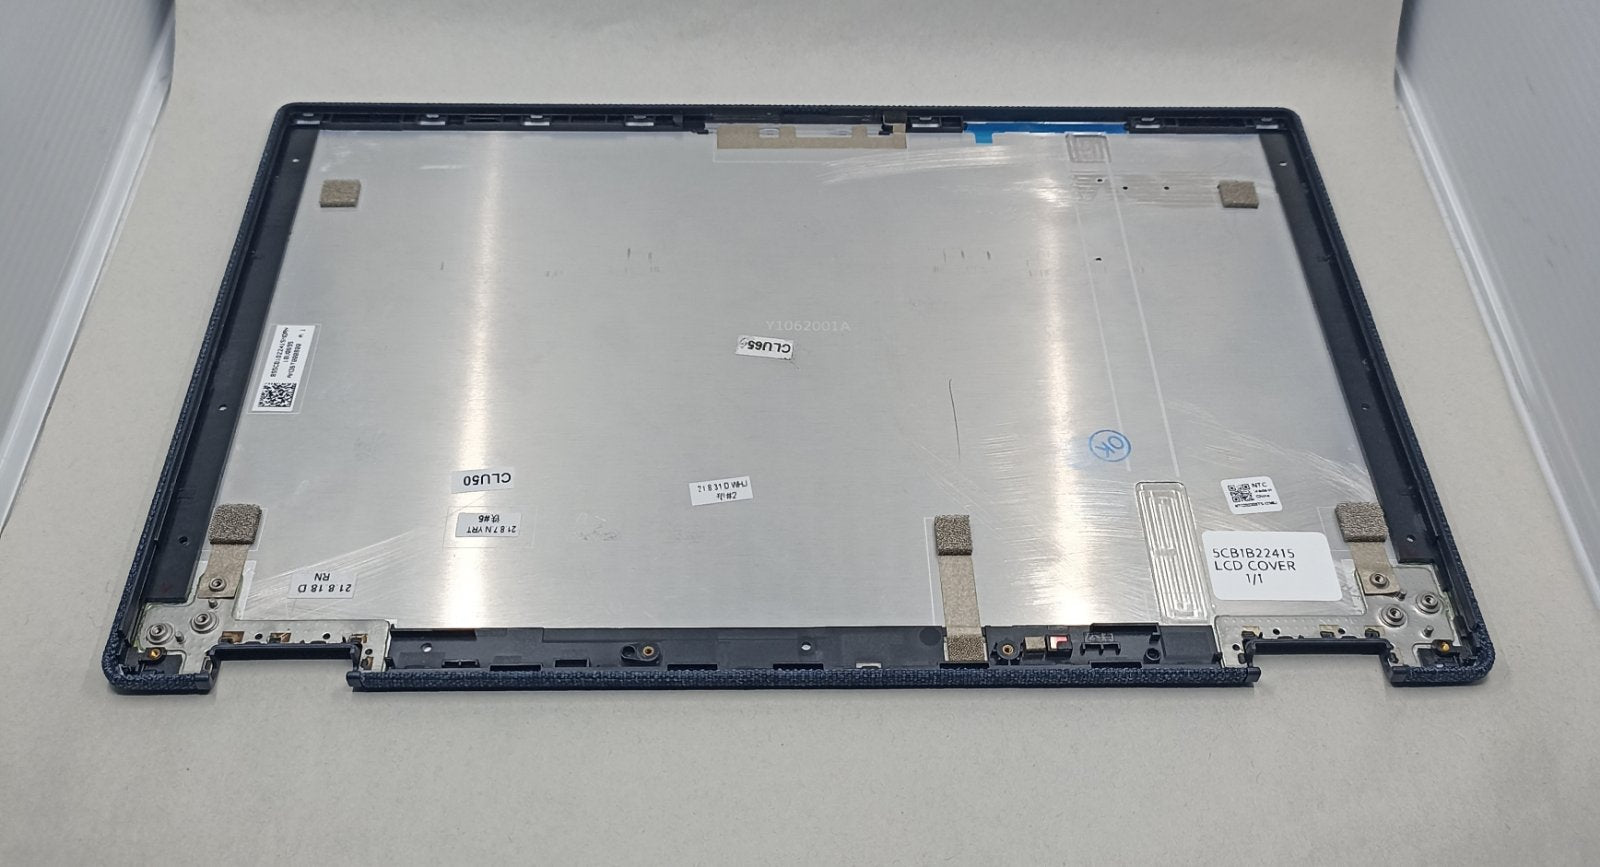 Replacement LCD Cover for Lenovo Yoga 6-13ARE05 WL